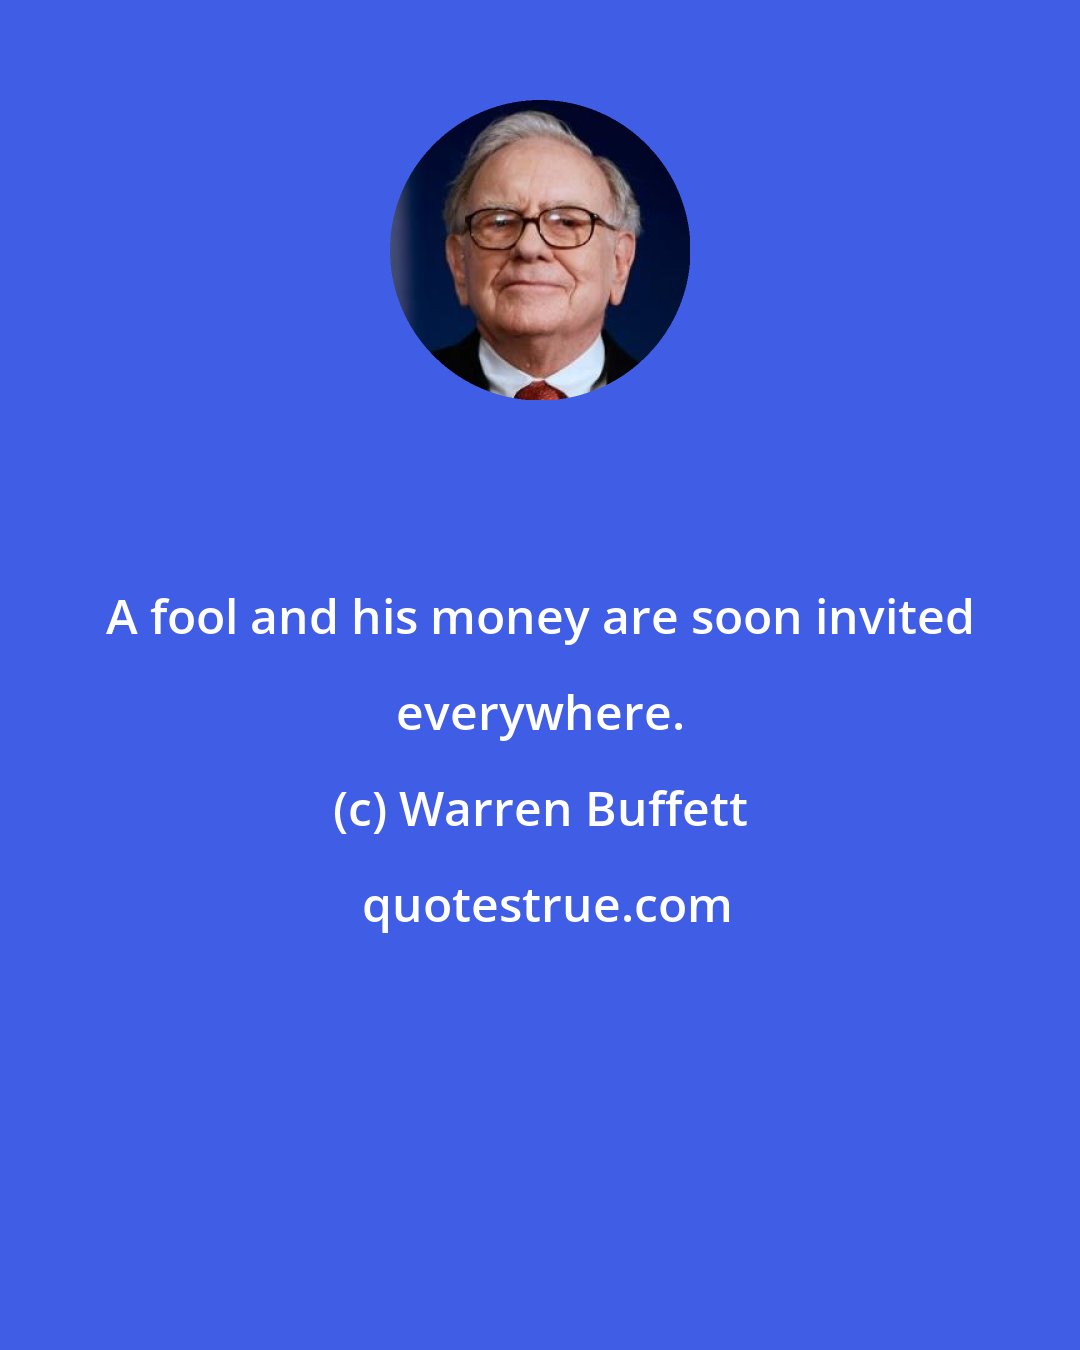 Warren Buffett: A fool and his money are soon invited everywhere.